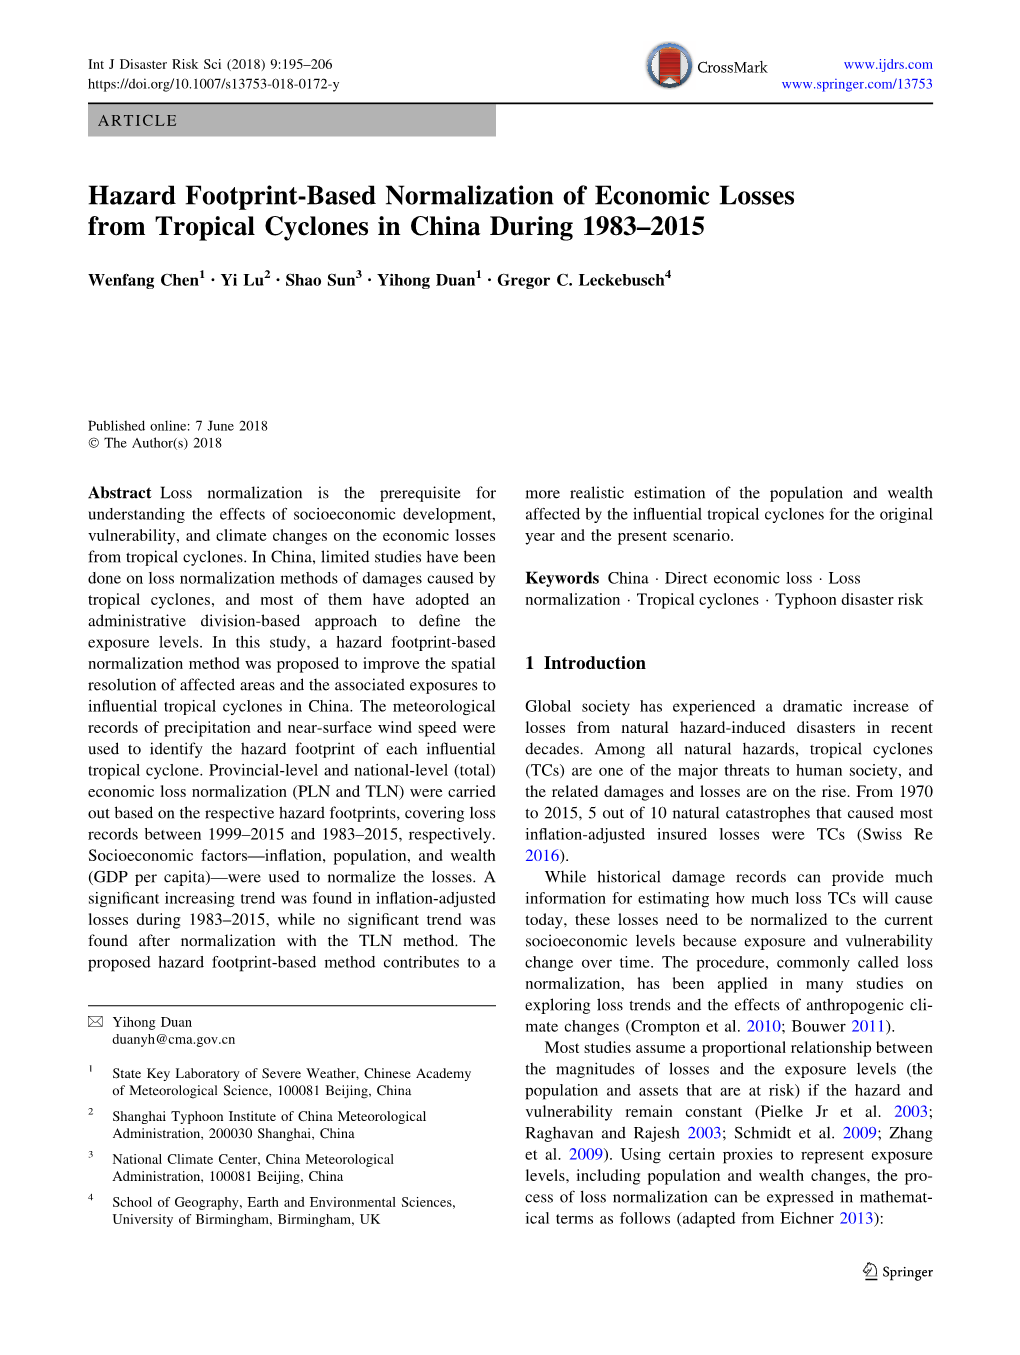 Hazard Footprint-Based Normalization of Economic Losses from Tropical Cyclones in China During 1983–2015